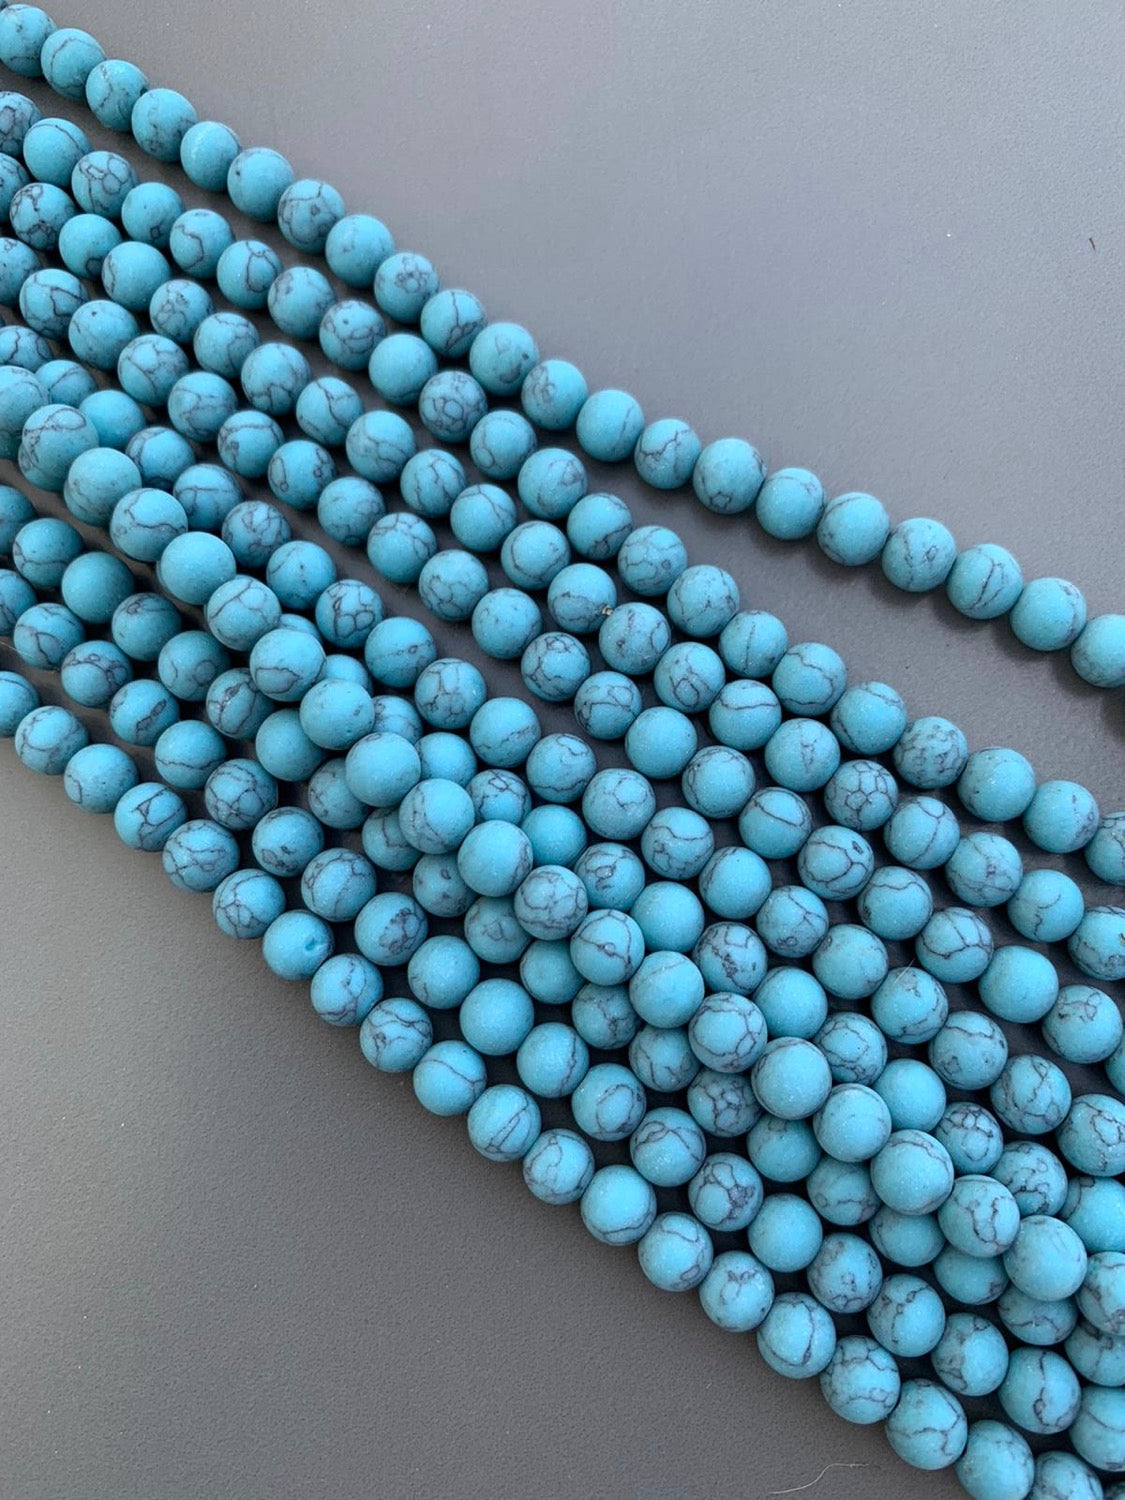 8mm Turquoise howlite 21804 Qty 46 beads per strand